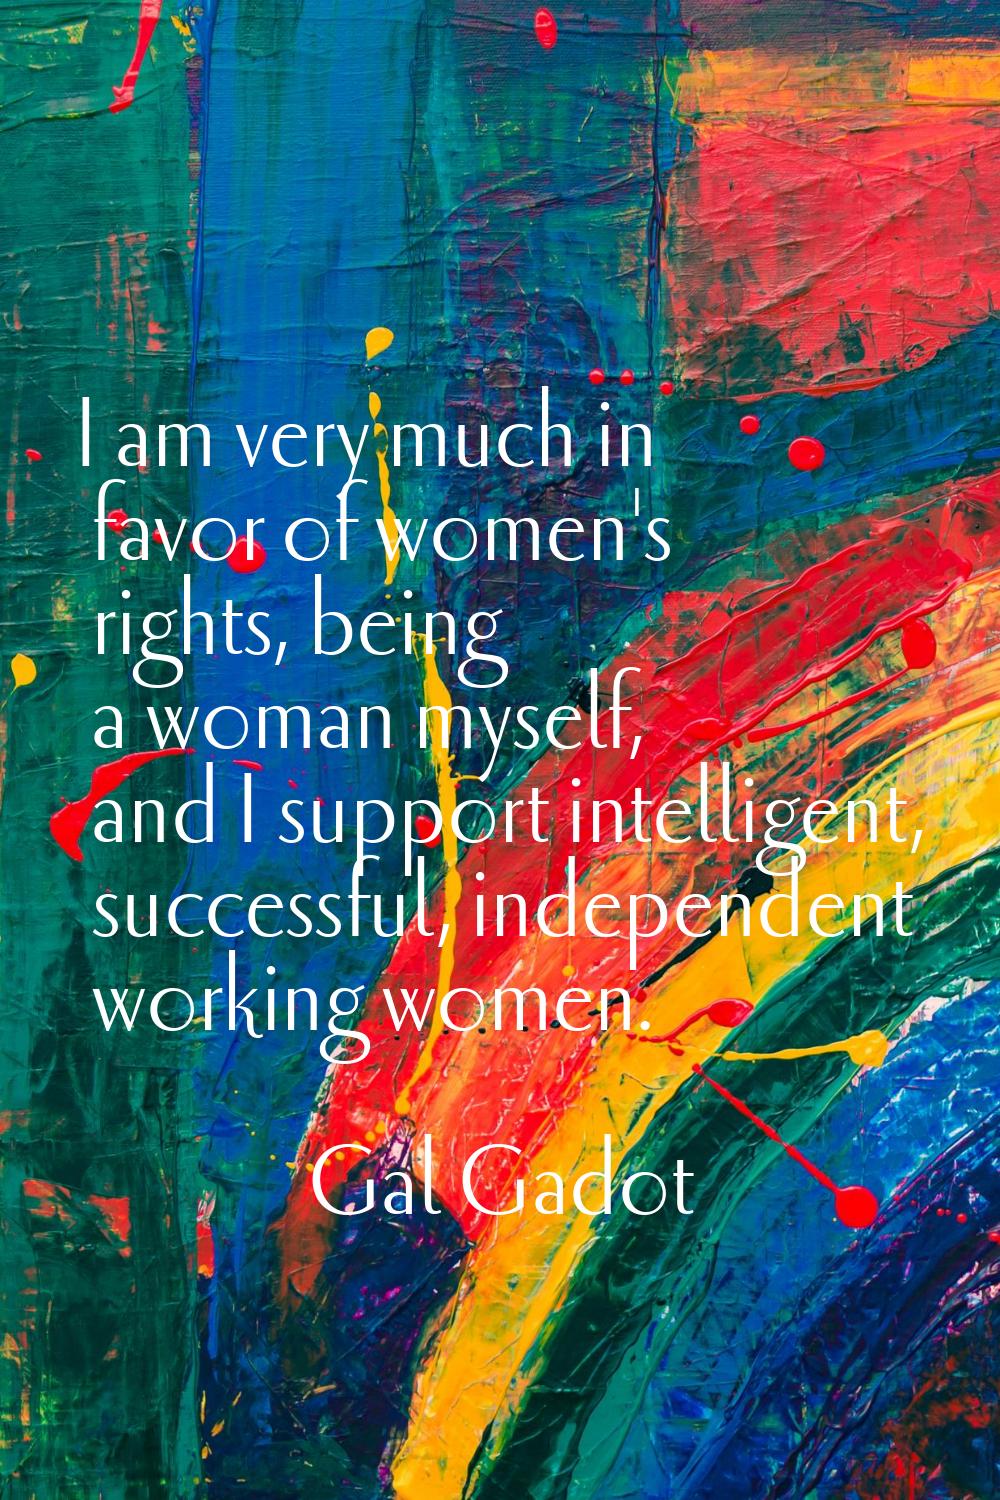 I am very much in favor of women's rights, being a woman myself, and I support intelligent, success